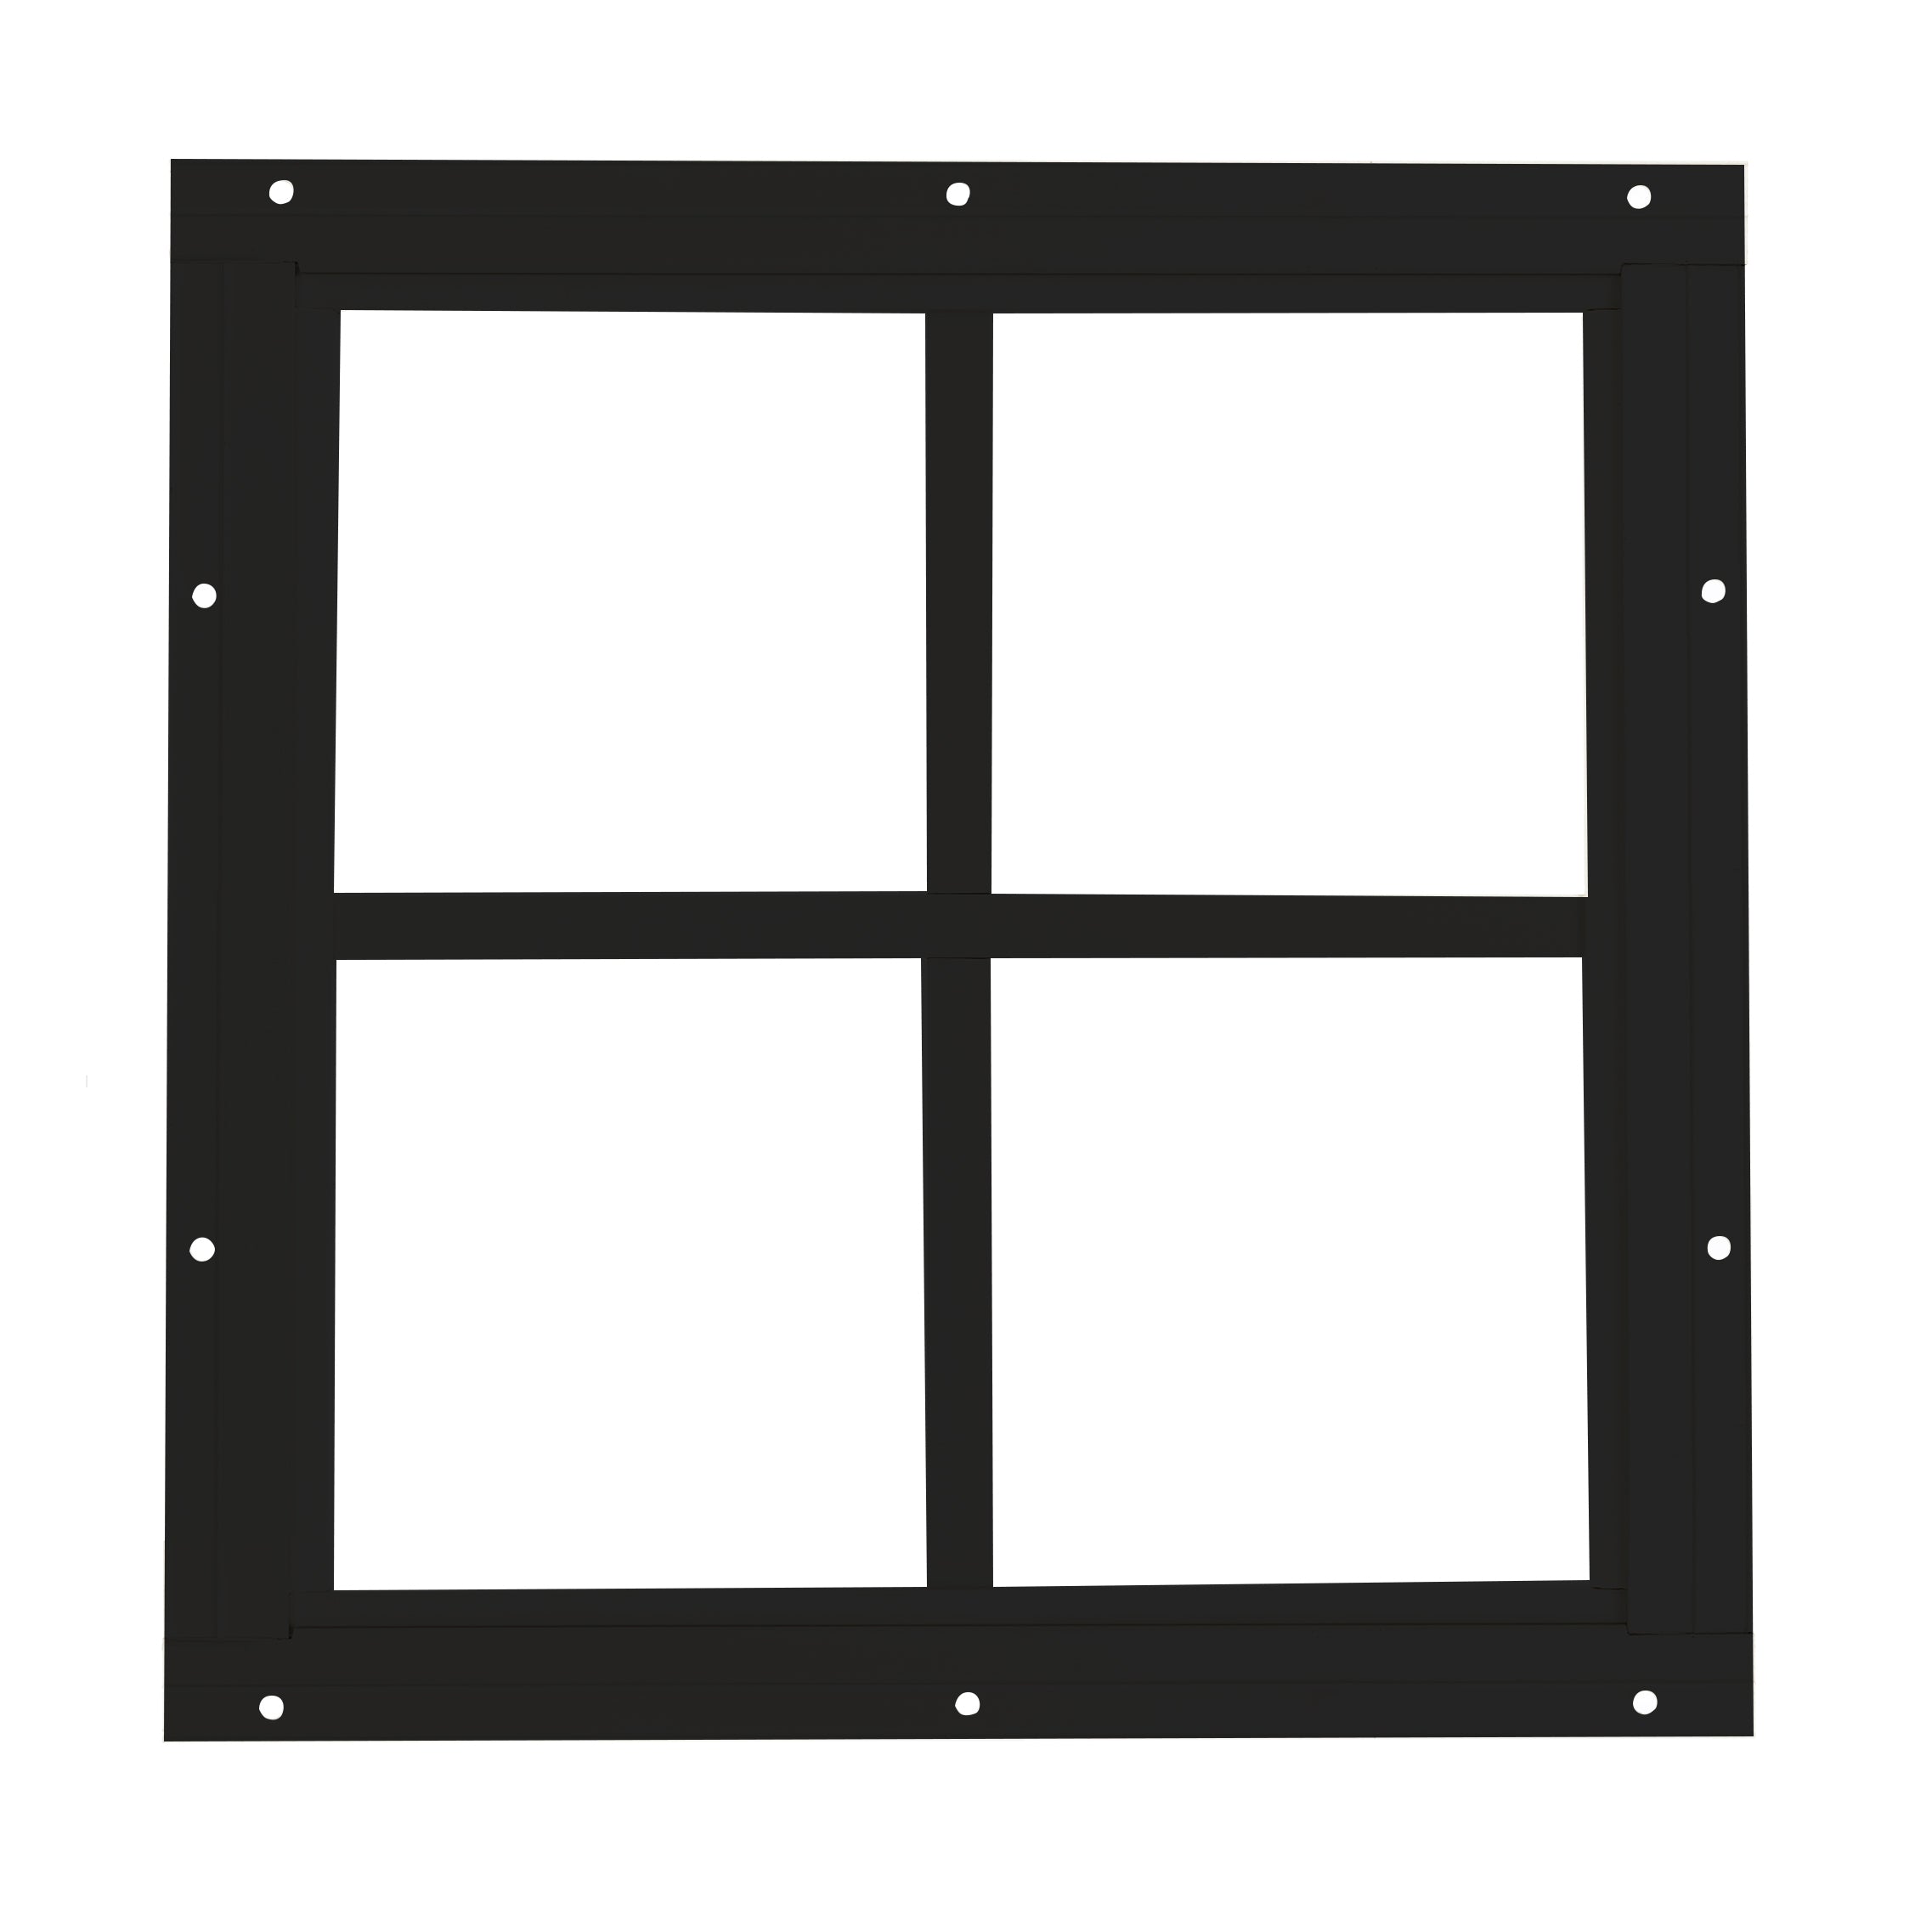 12" W x 12" H Square Gable Flush Mount Window with 4 Grids for Sheds, Playhouses, and MORE BLACK